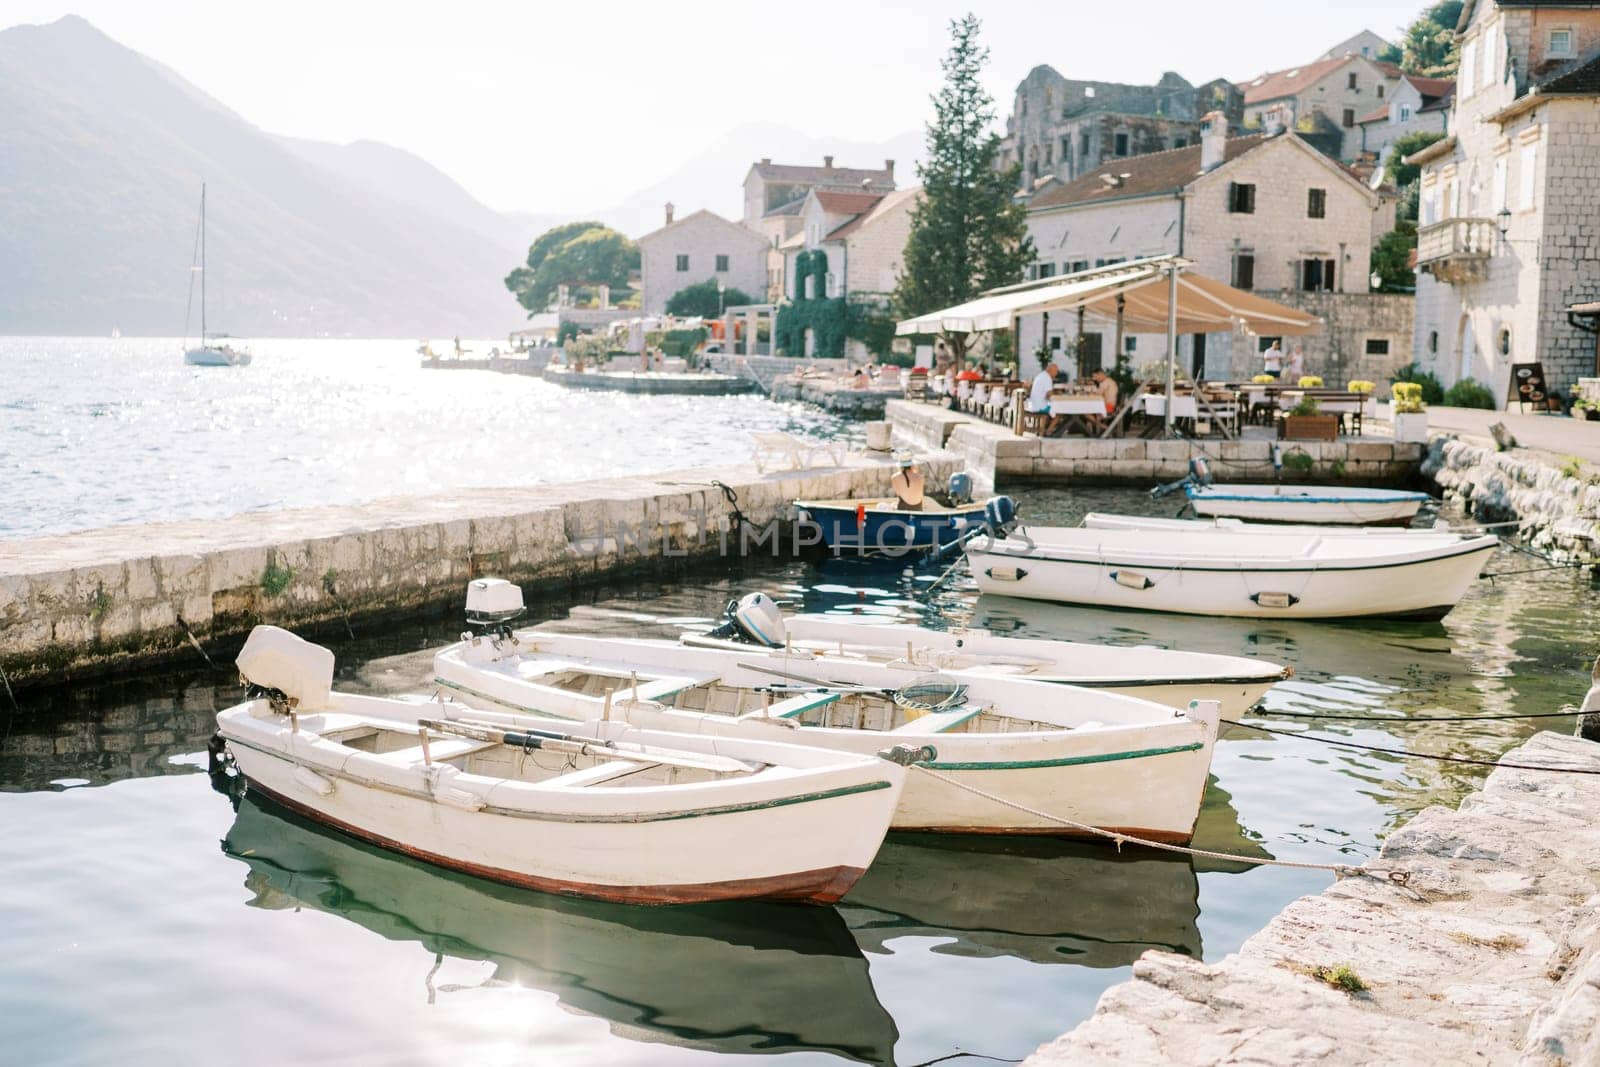 Fishing boats are moored in a row off the coast of Perast. Montenegro by Nadtochiy